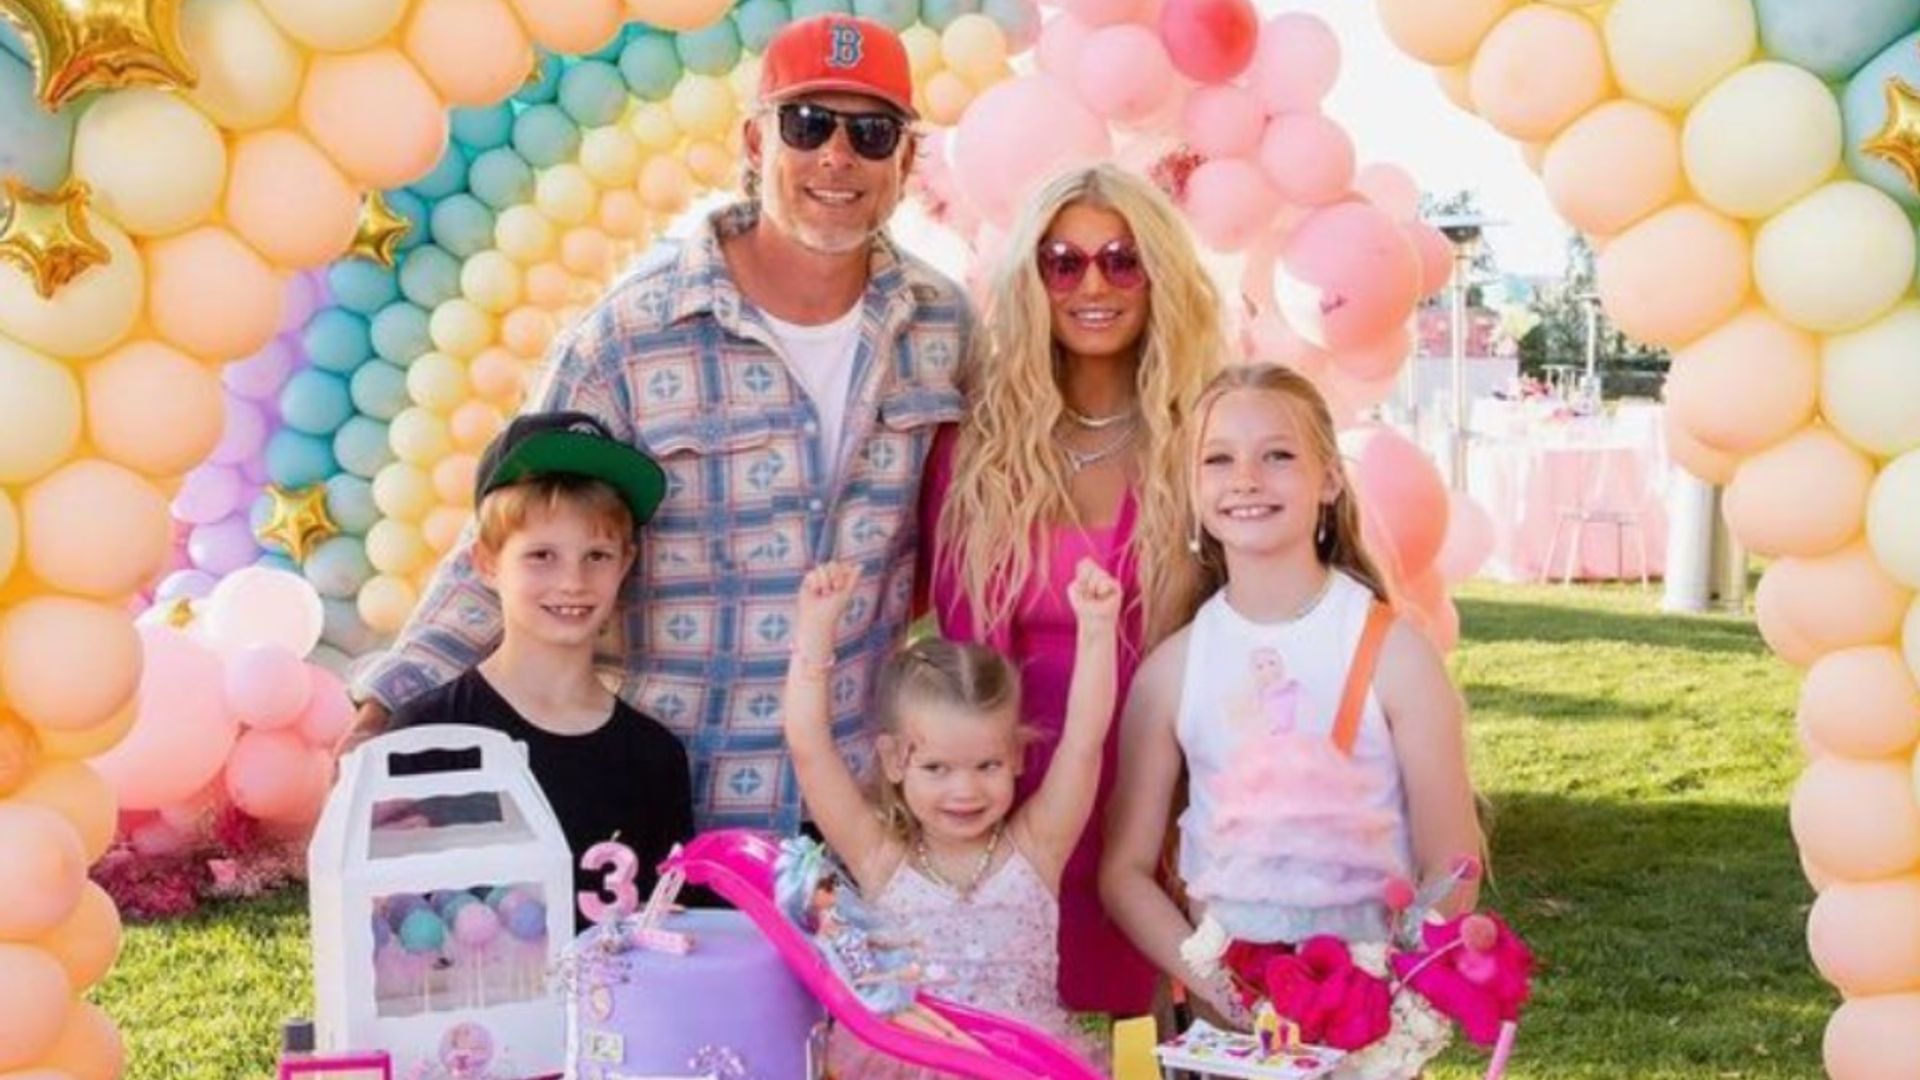 Jessica Simpson pics of mini-me daughter Birdie have fans doing a